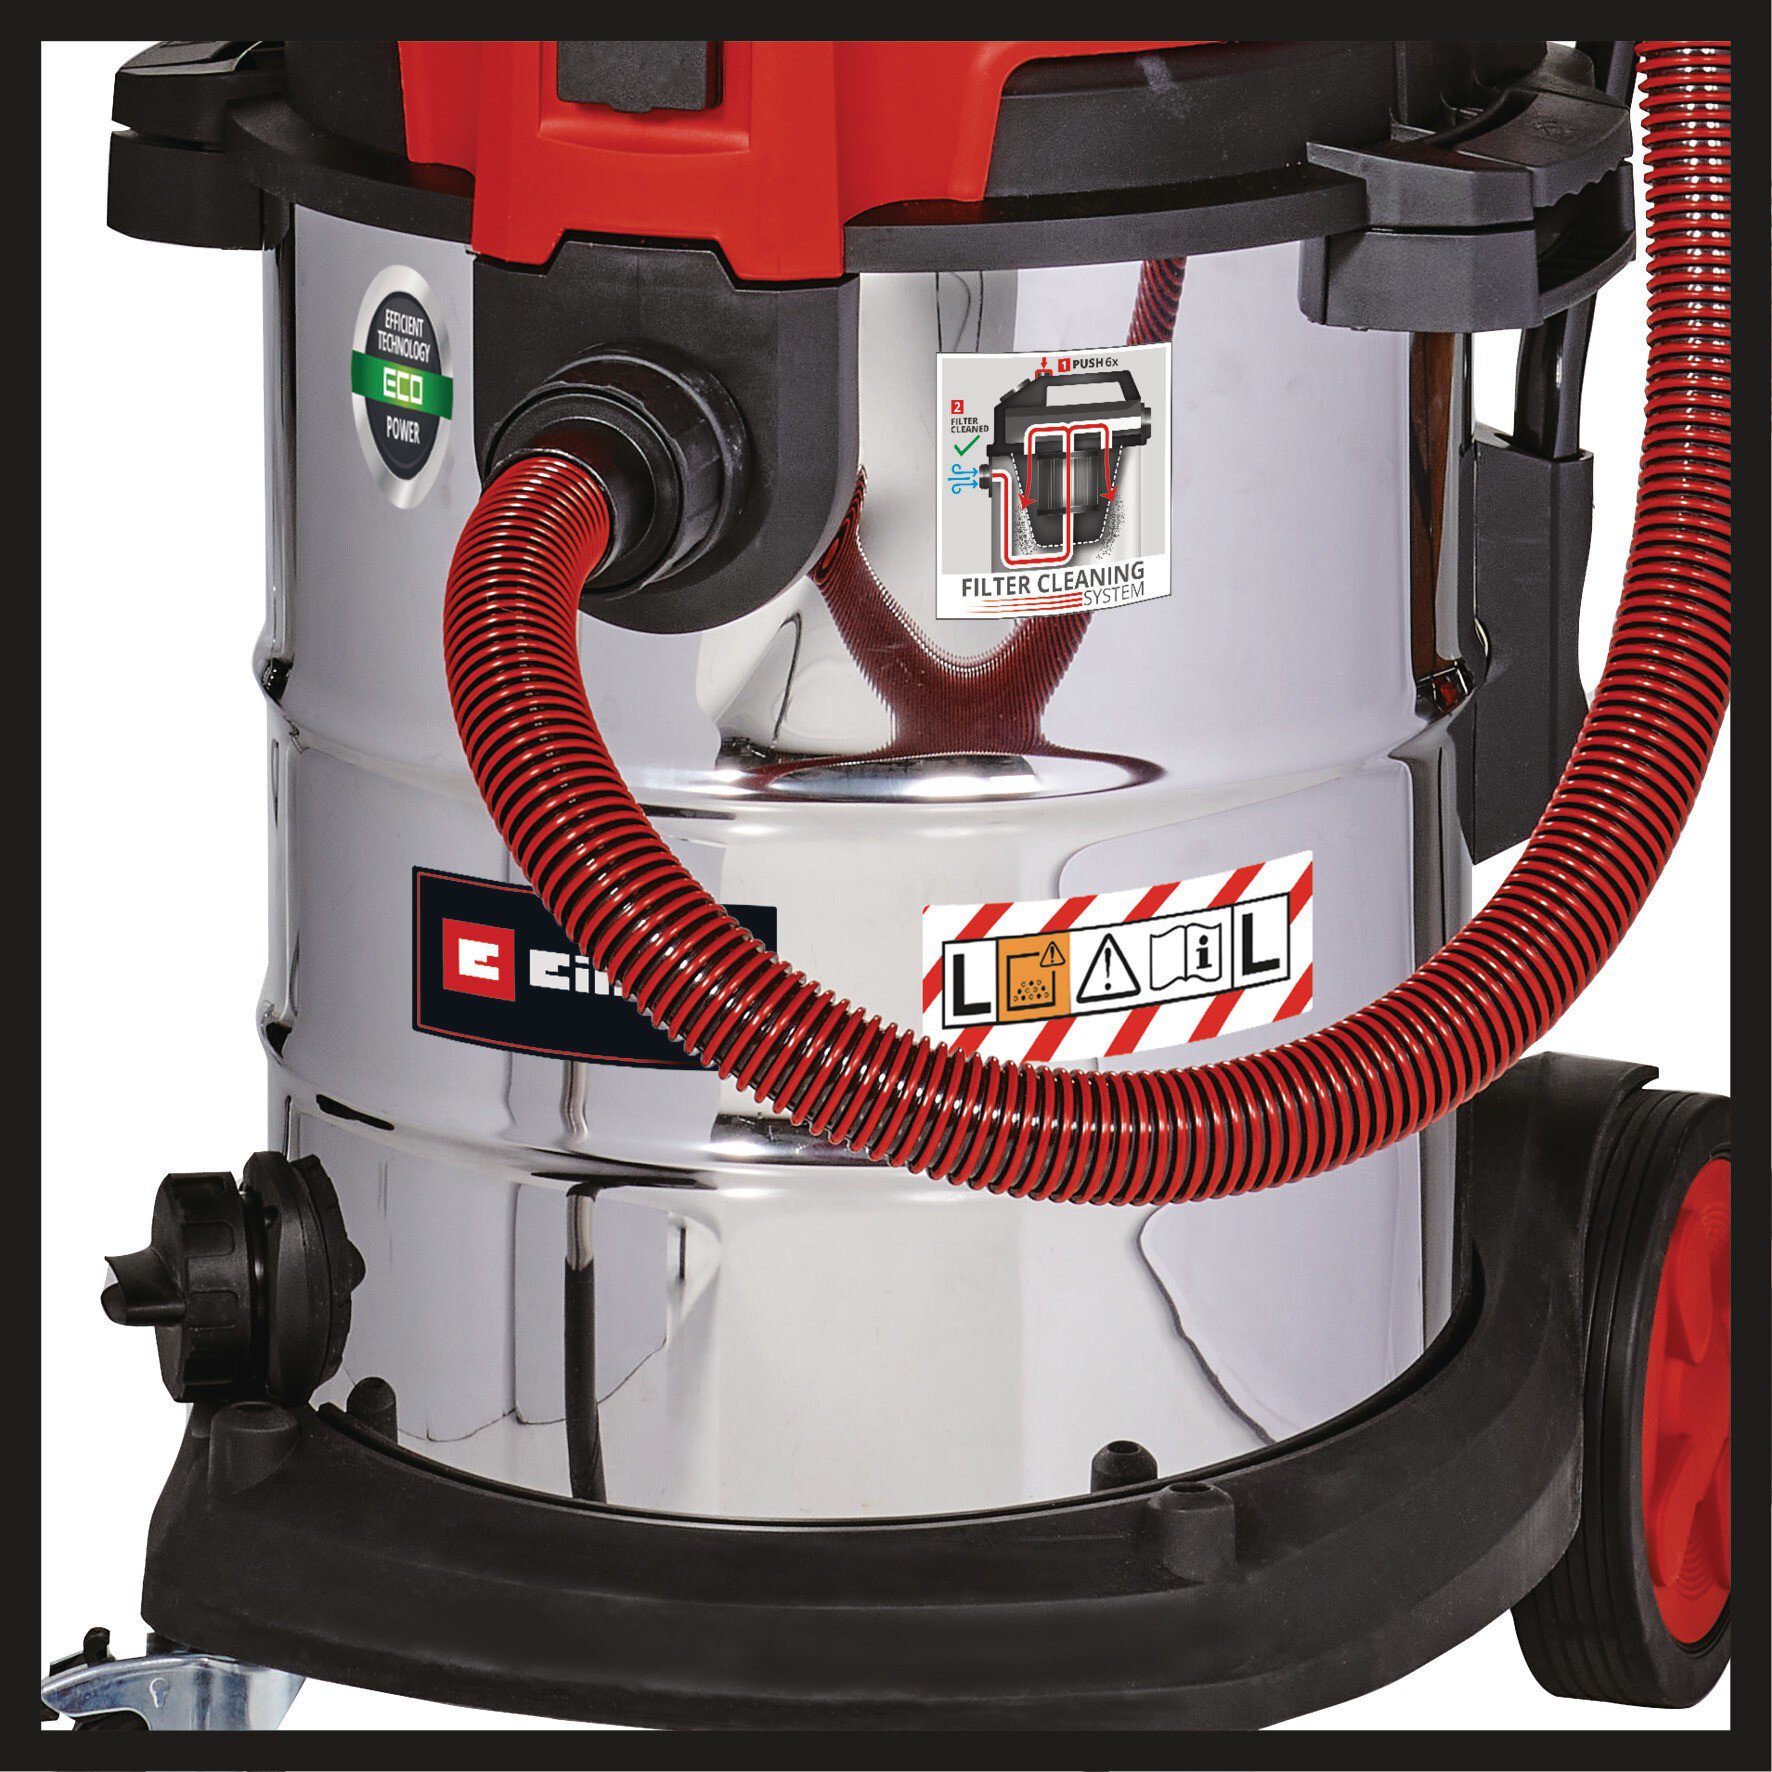 einhell-expert-wet-dry-vacuum-cleaner-elect-2342475-detail_image-003